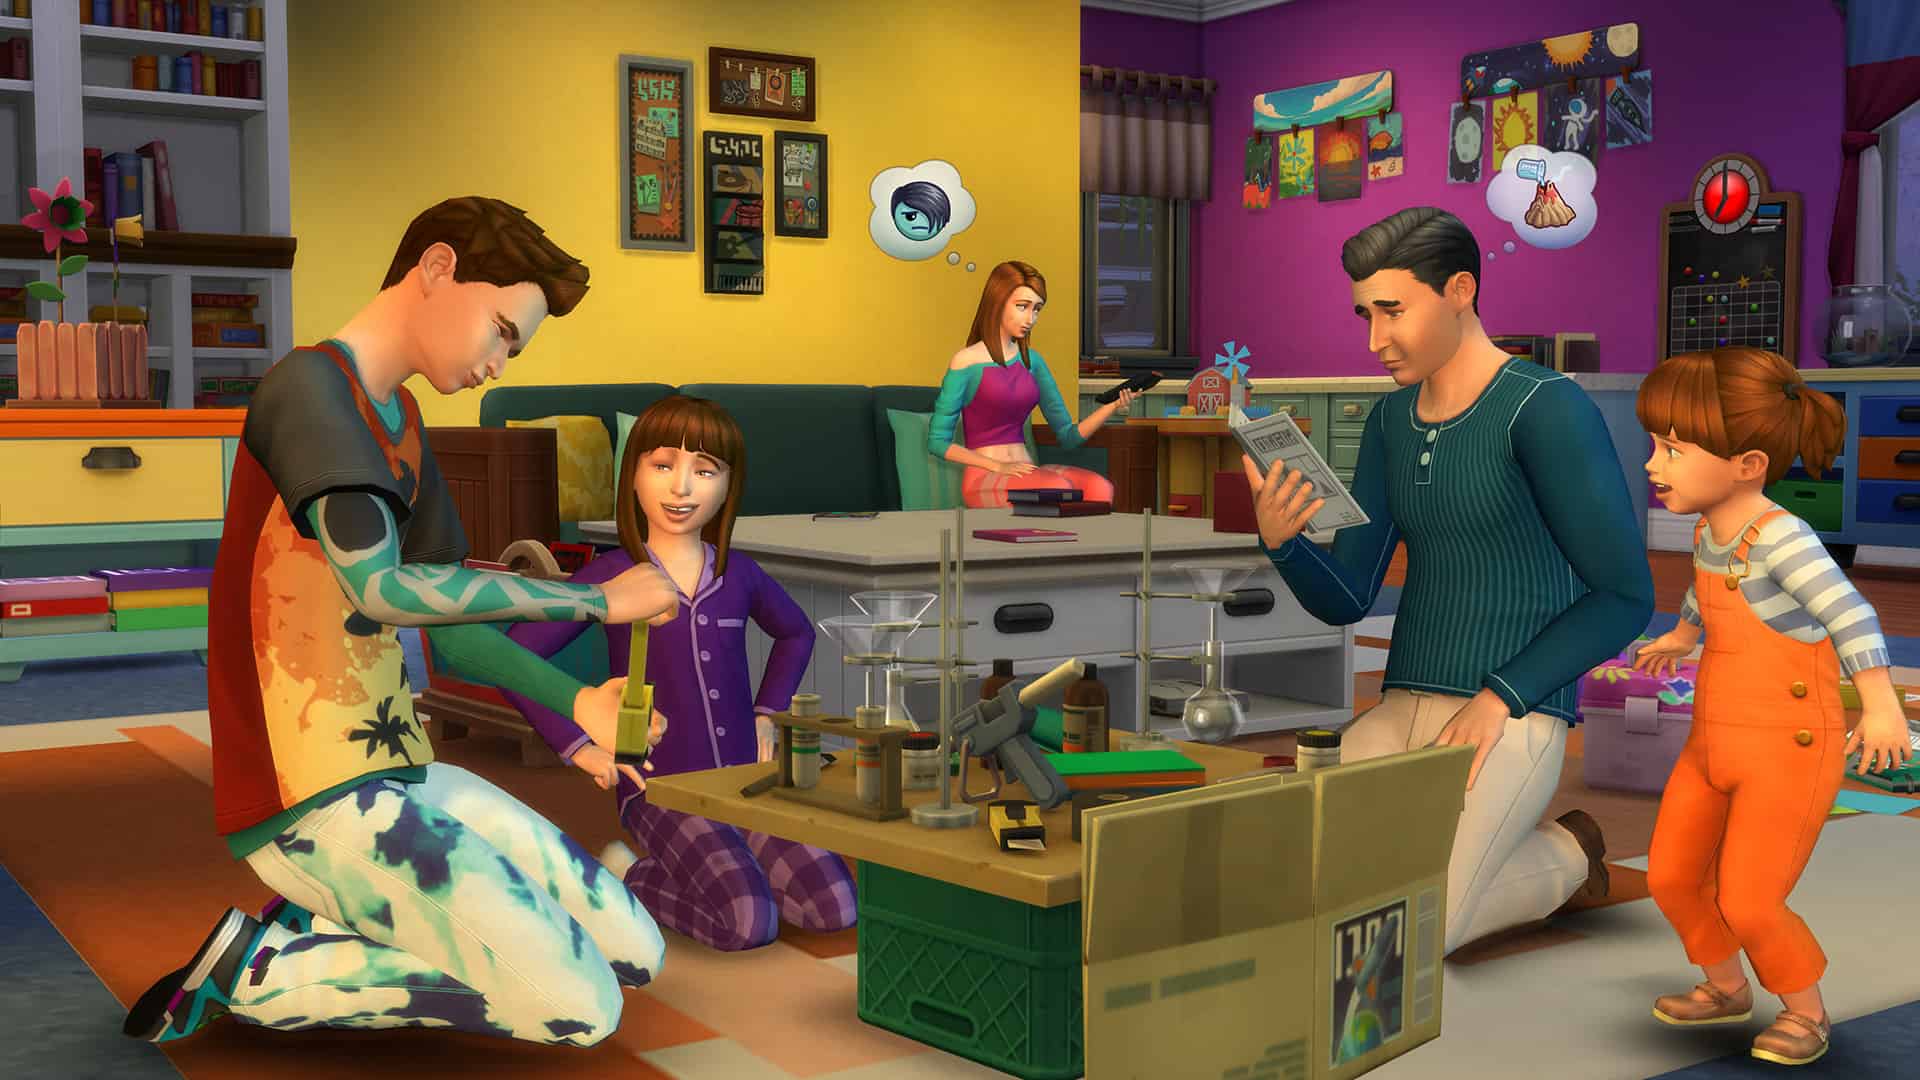 The Sims 4: Get Famous Cheats & Cheat Codes for PC, PS4, and Xbox One -  Cheat Code Central